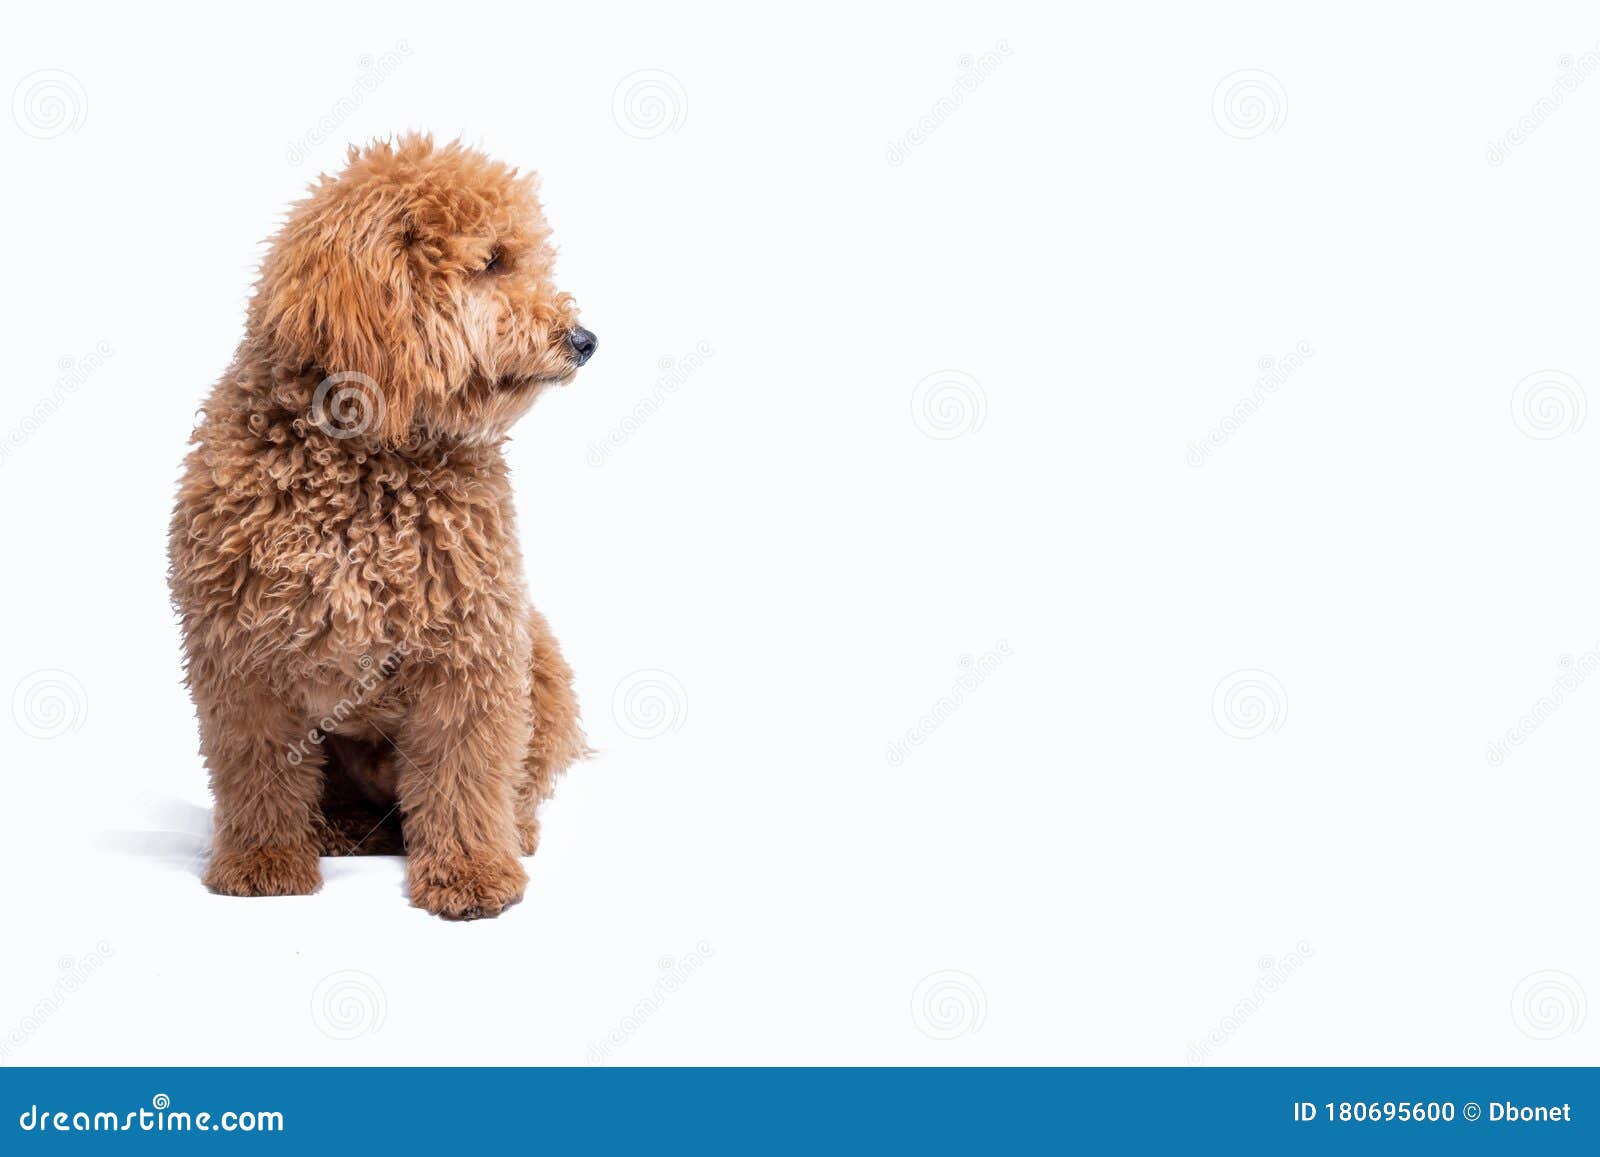 mini golden doodle puppy in a white background looking to the side